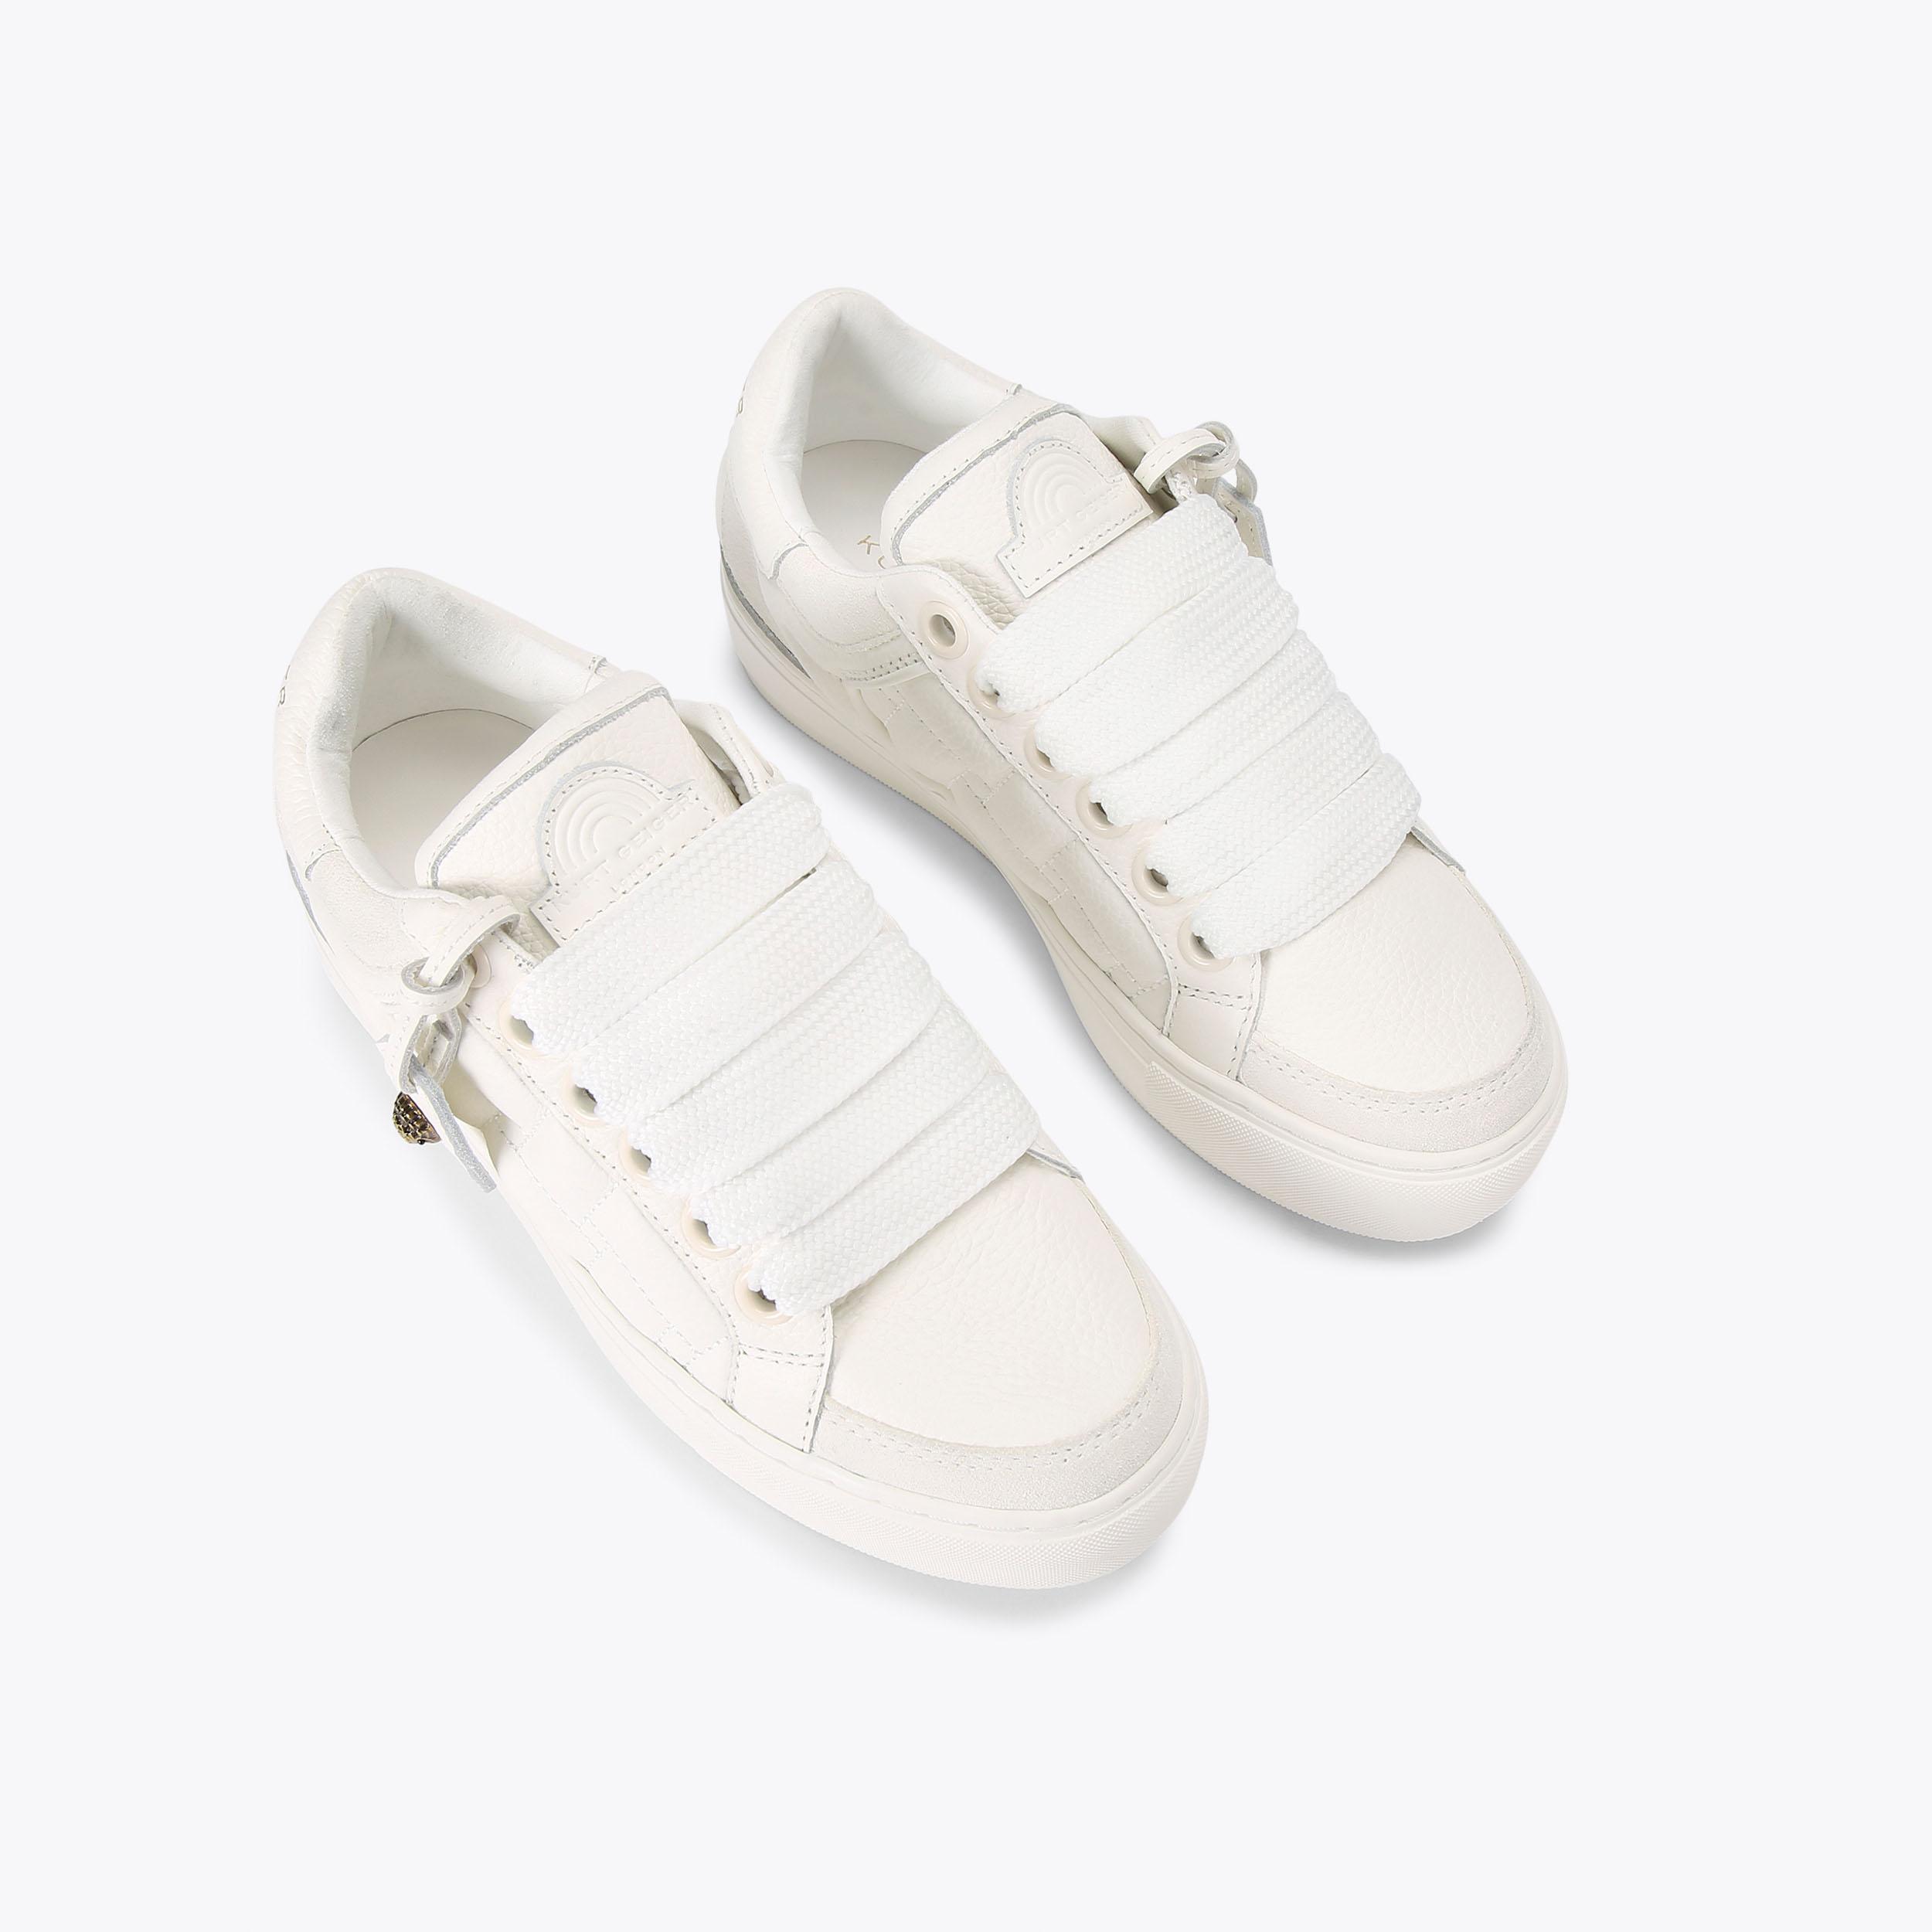 SOUTHBANK White Leather Sneakers by KURT GEIGER LONDON